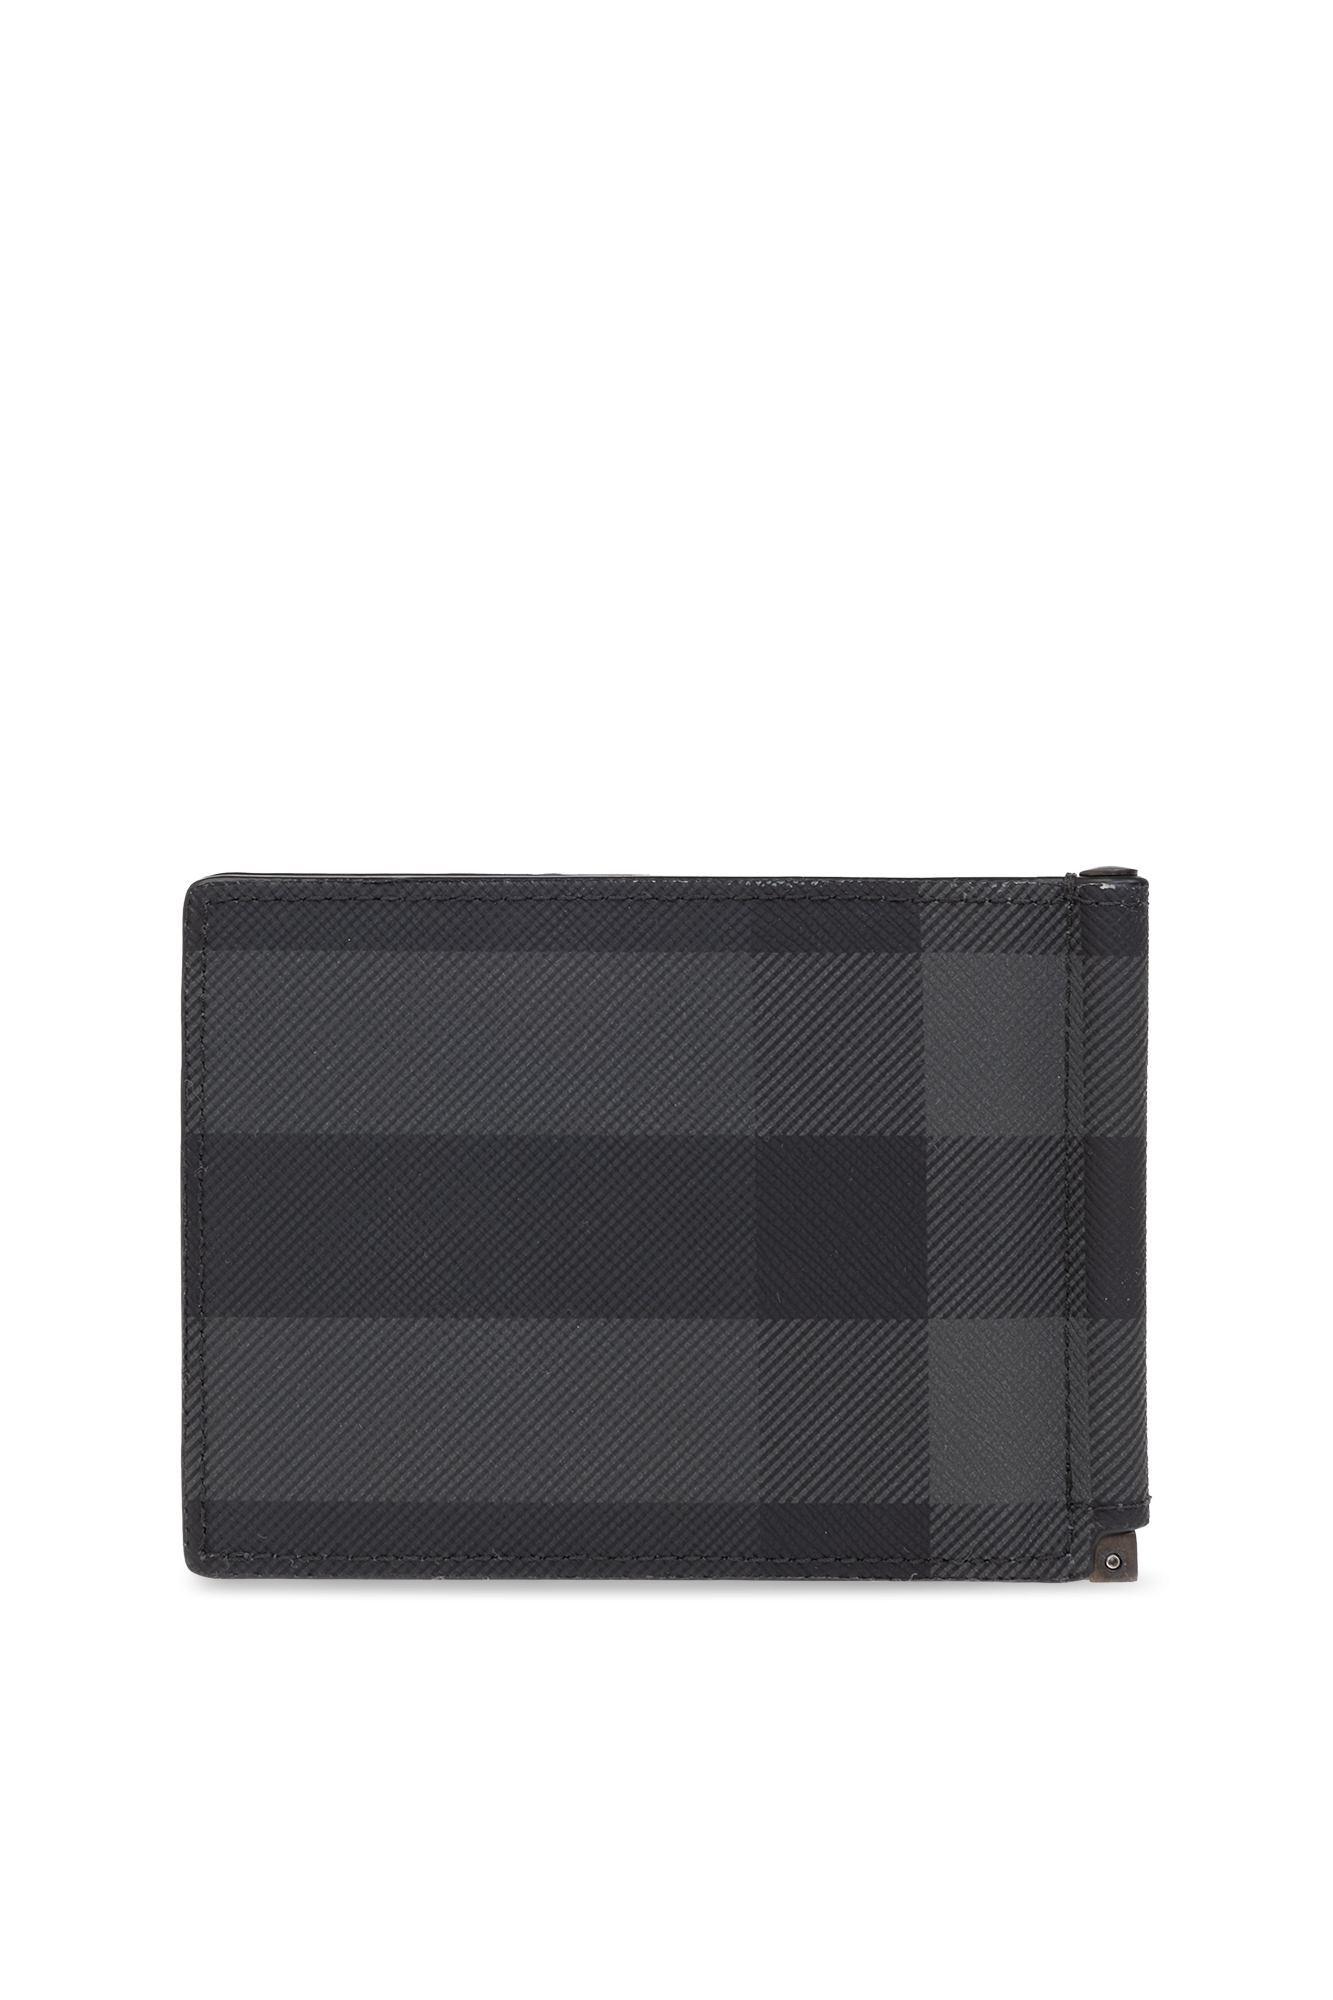 Burberry Bifold wallet with logo